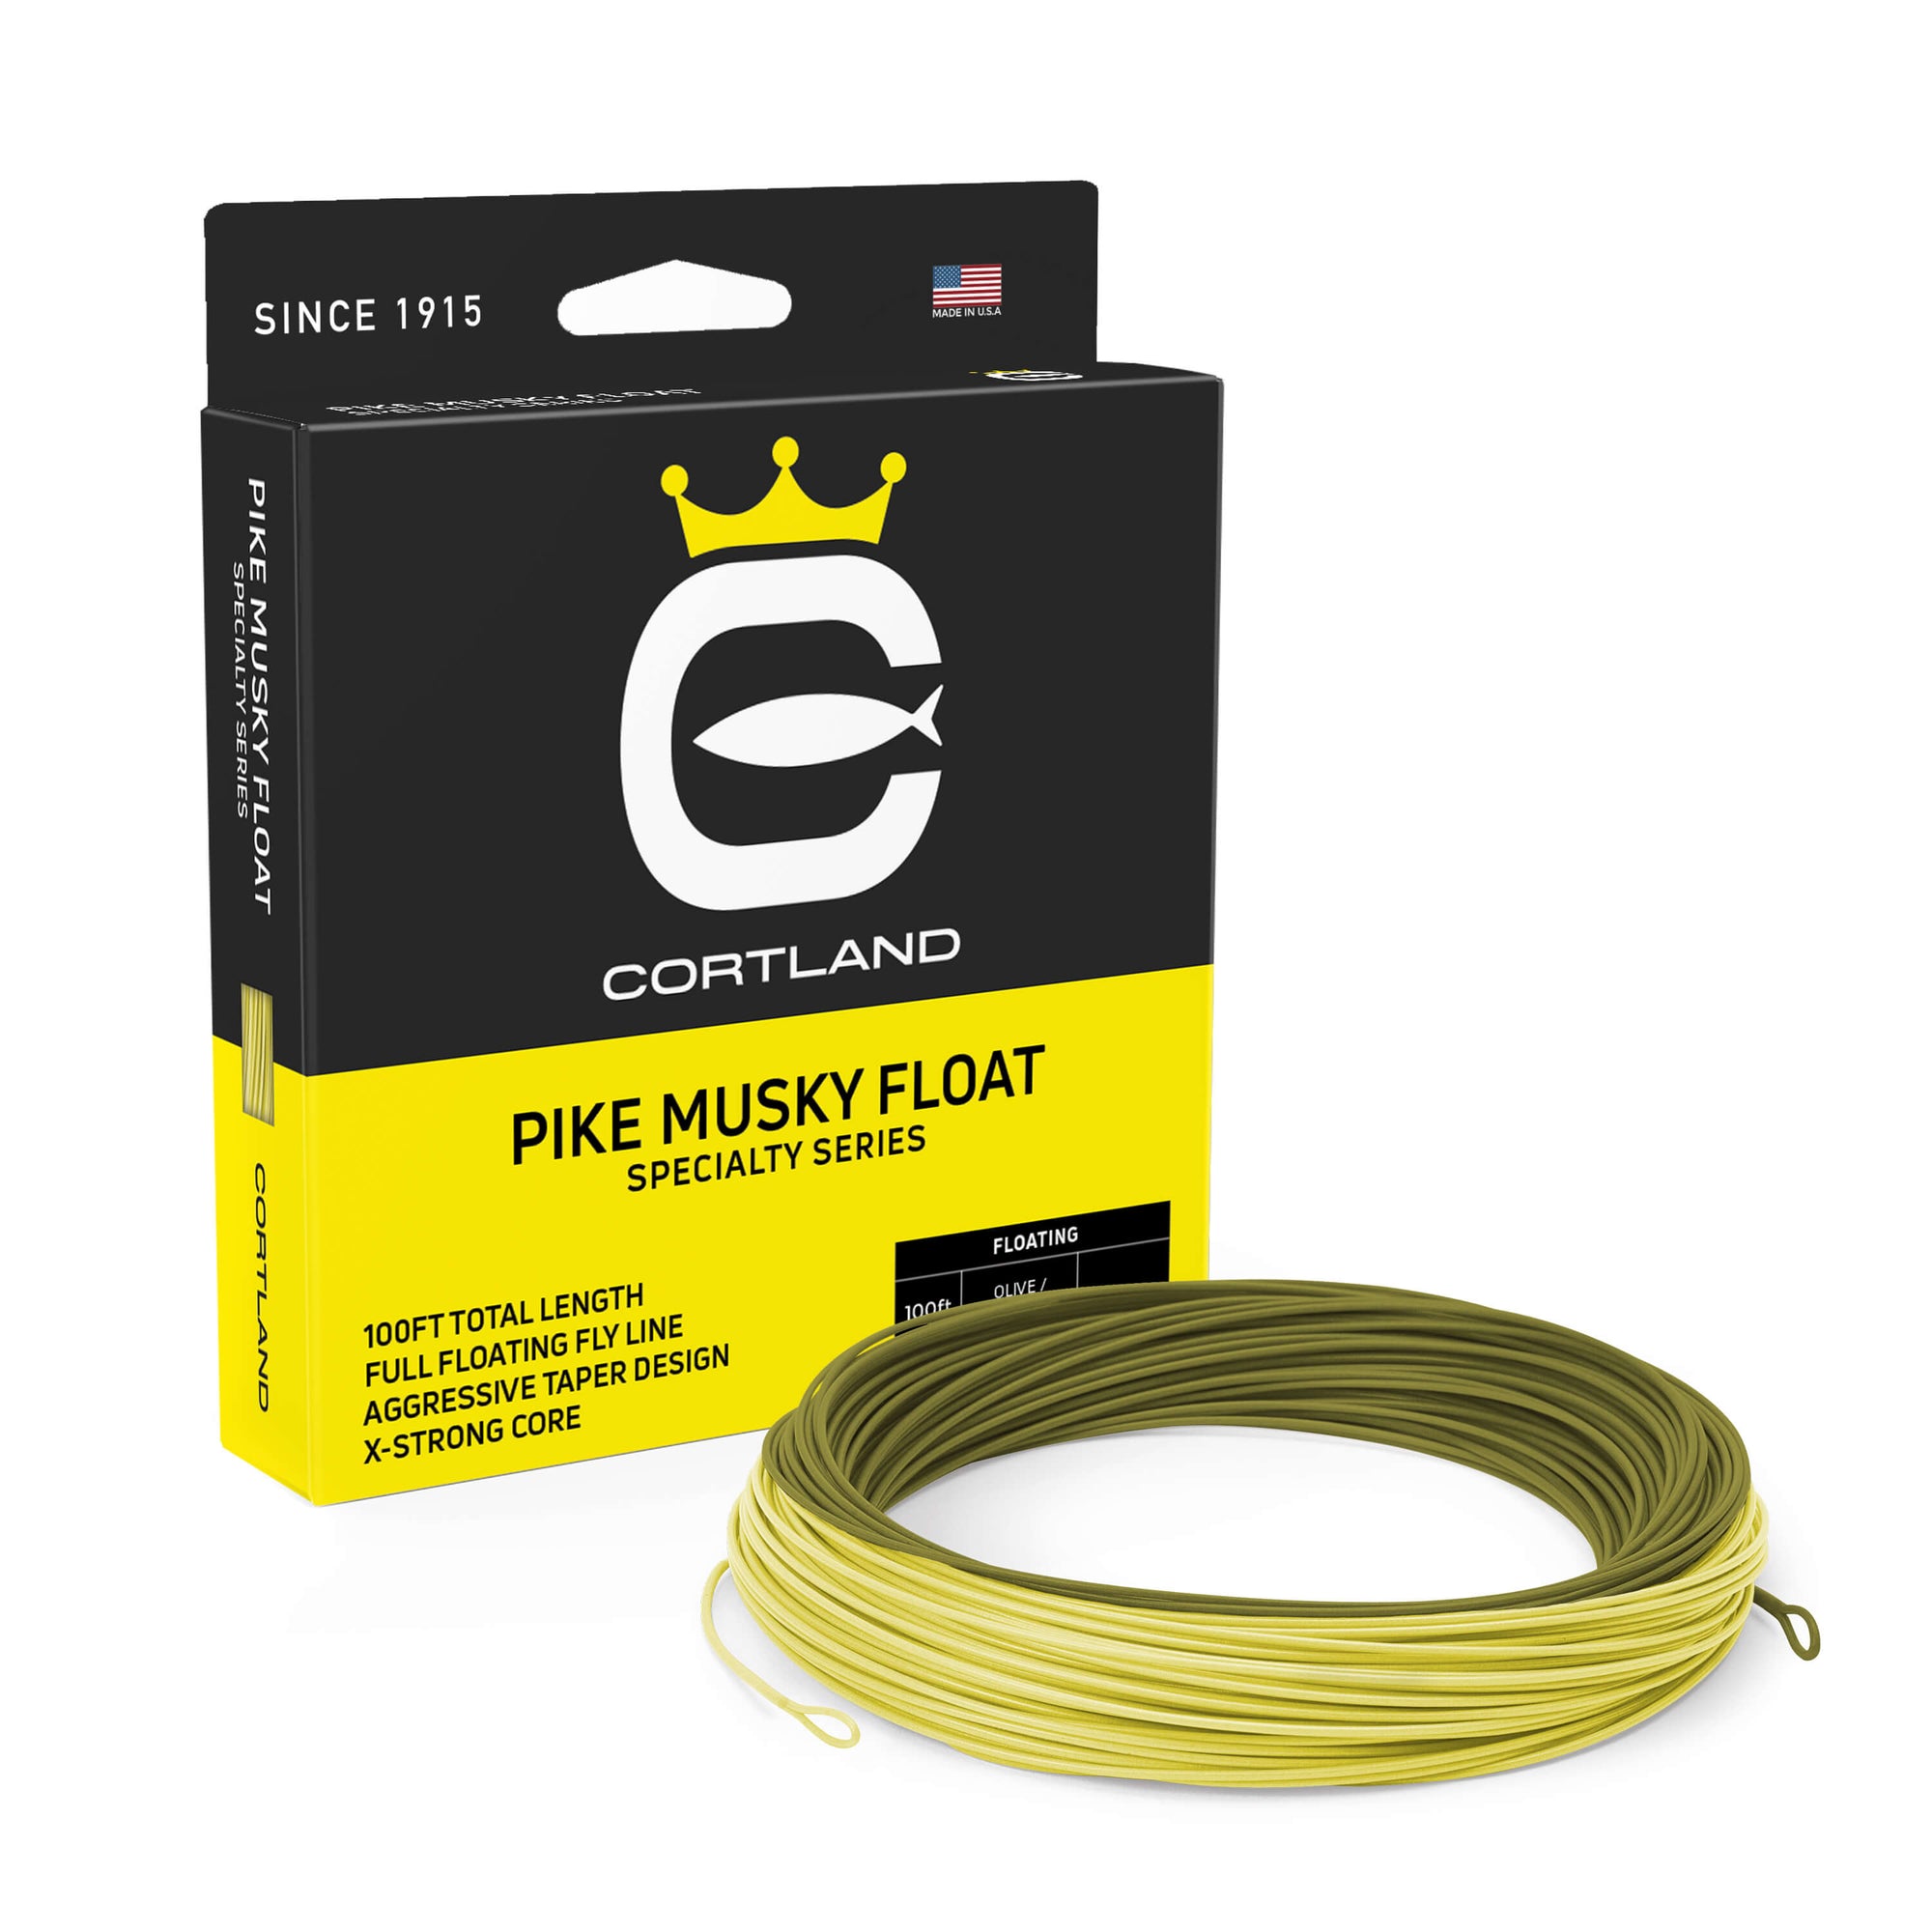 Pike Musky Float Fly Line Box and Coil. The coil is olive and pale yellow. The box has the Cortland logo and is black and yellow at the bottom of the box.